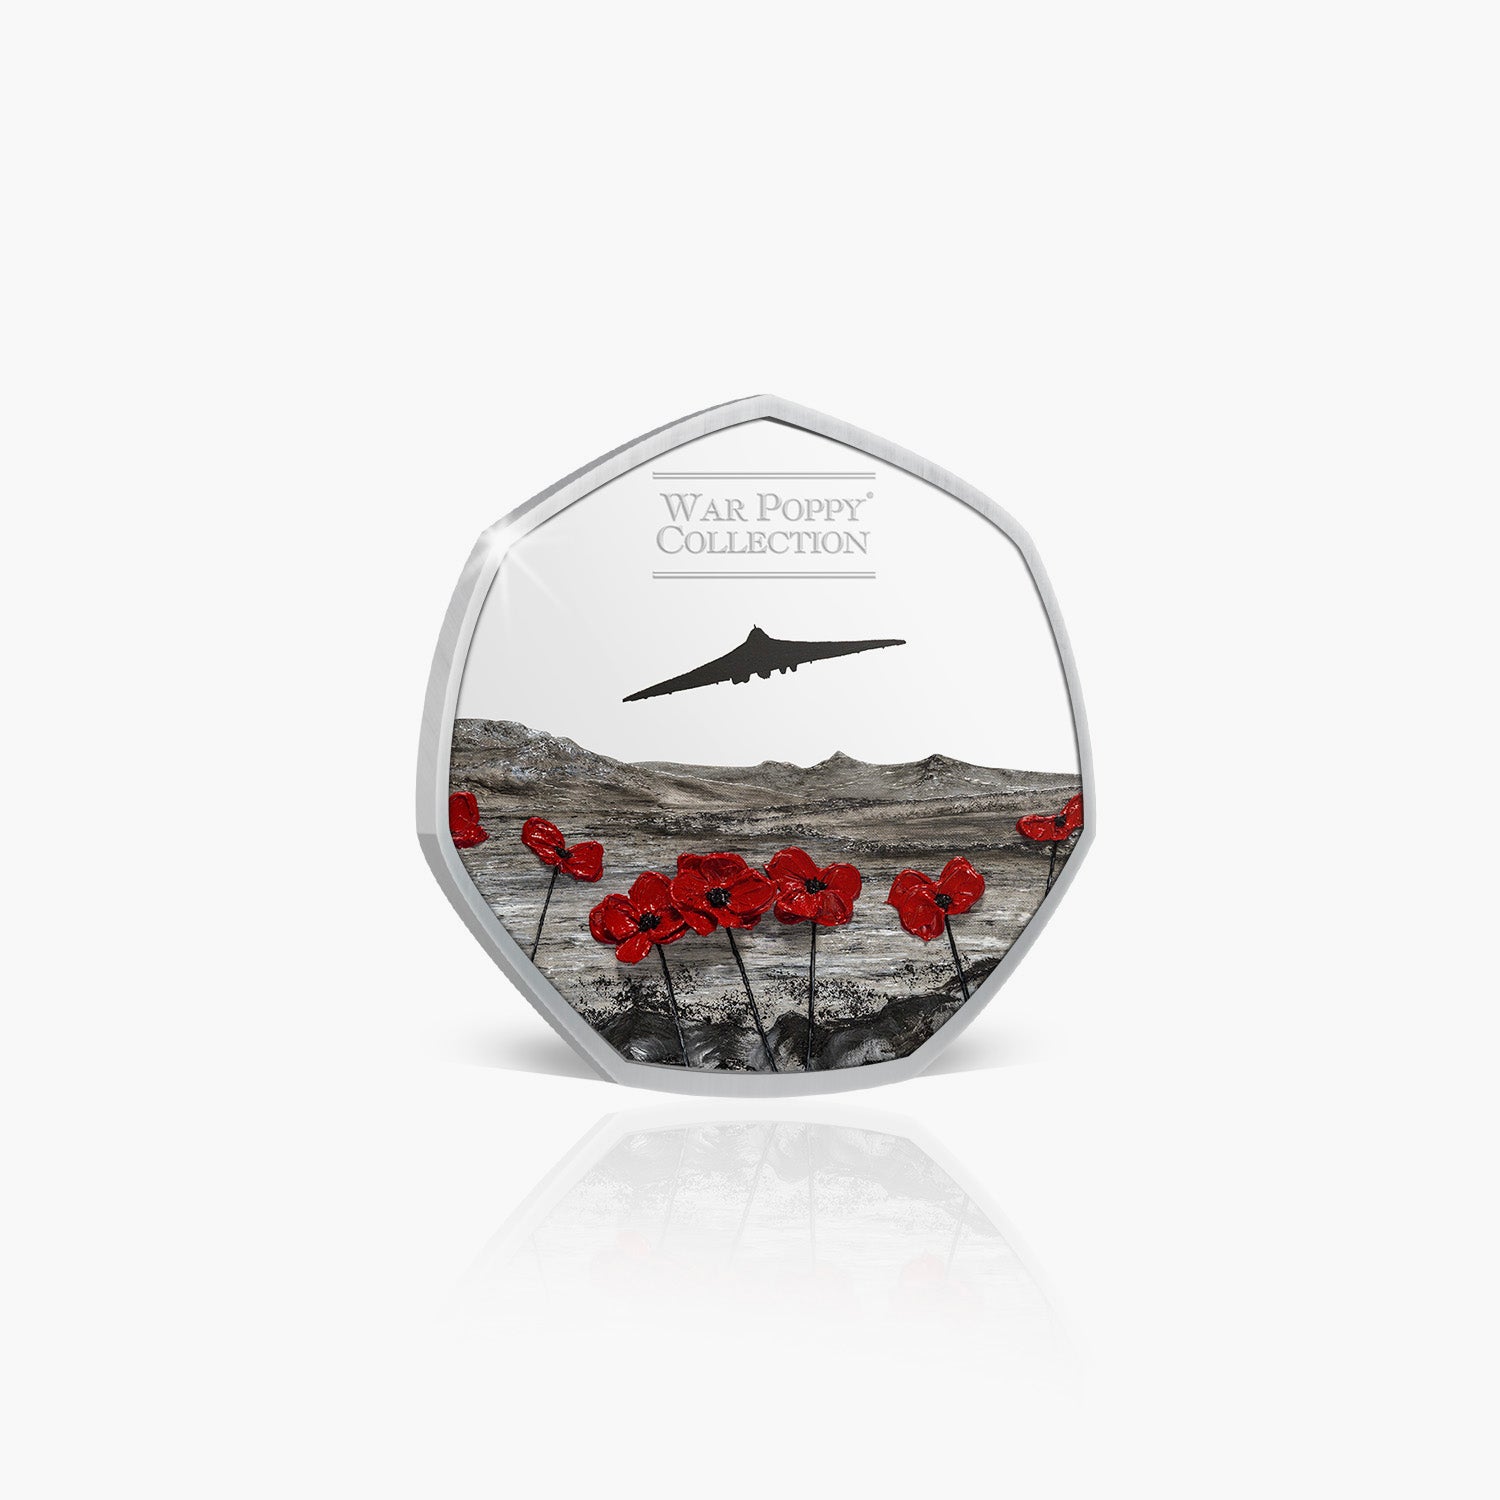 Ascension To Freedom Silver Plated Coin